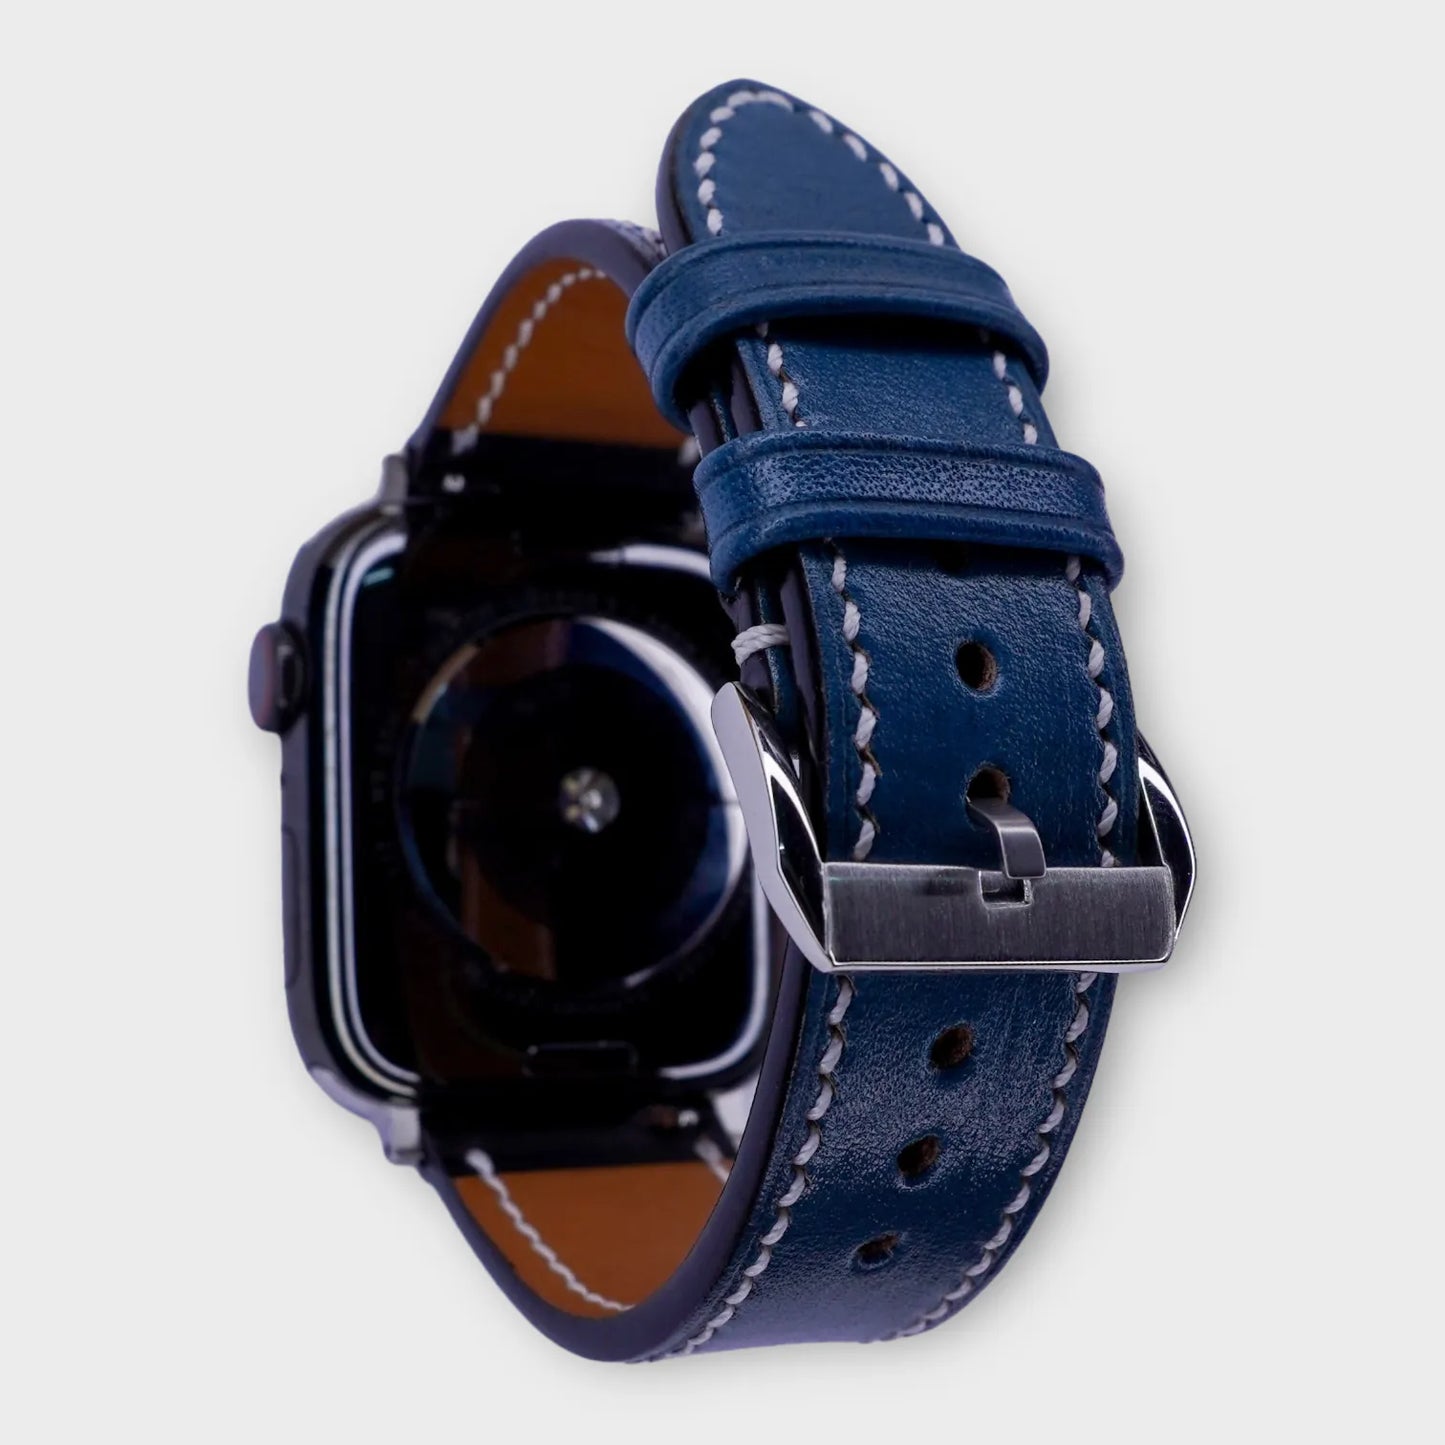 Stylish apple watch leather band in Veg leather, featuring a blue to black gradient.